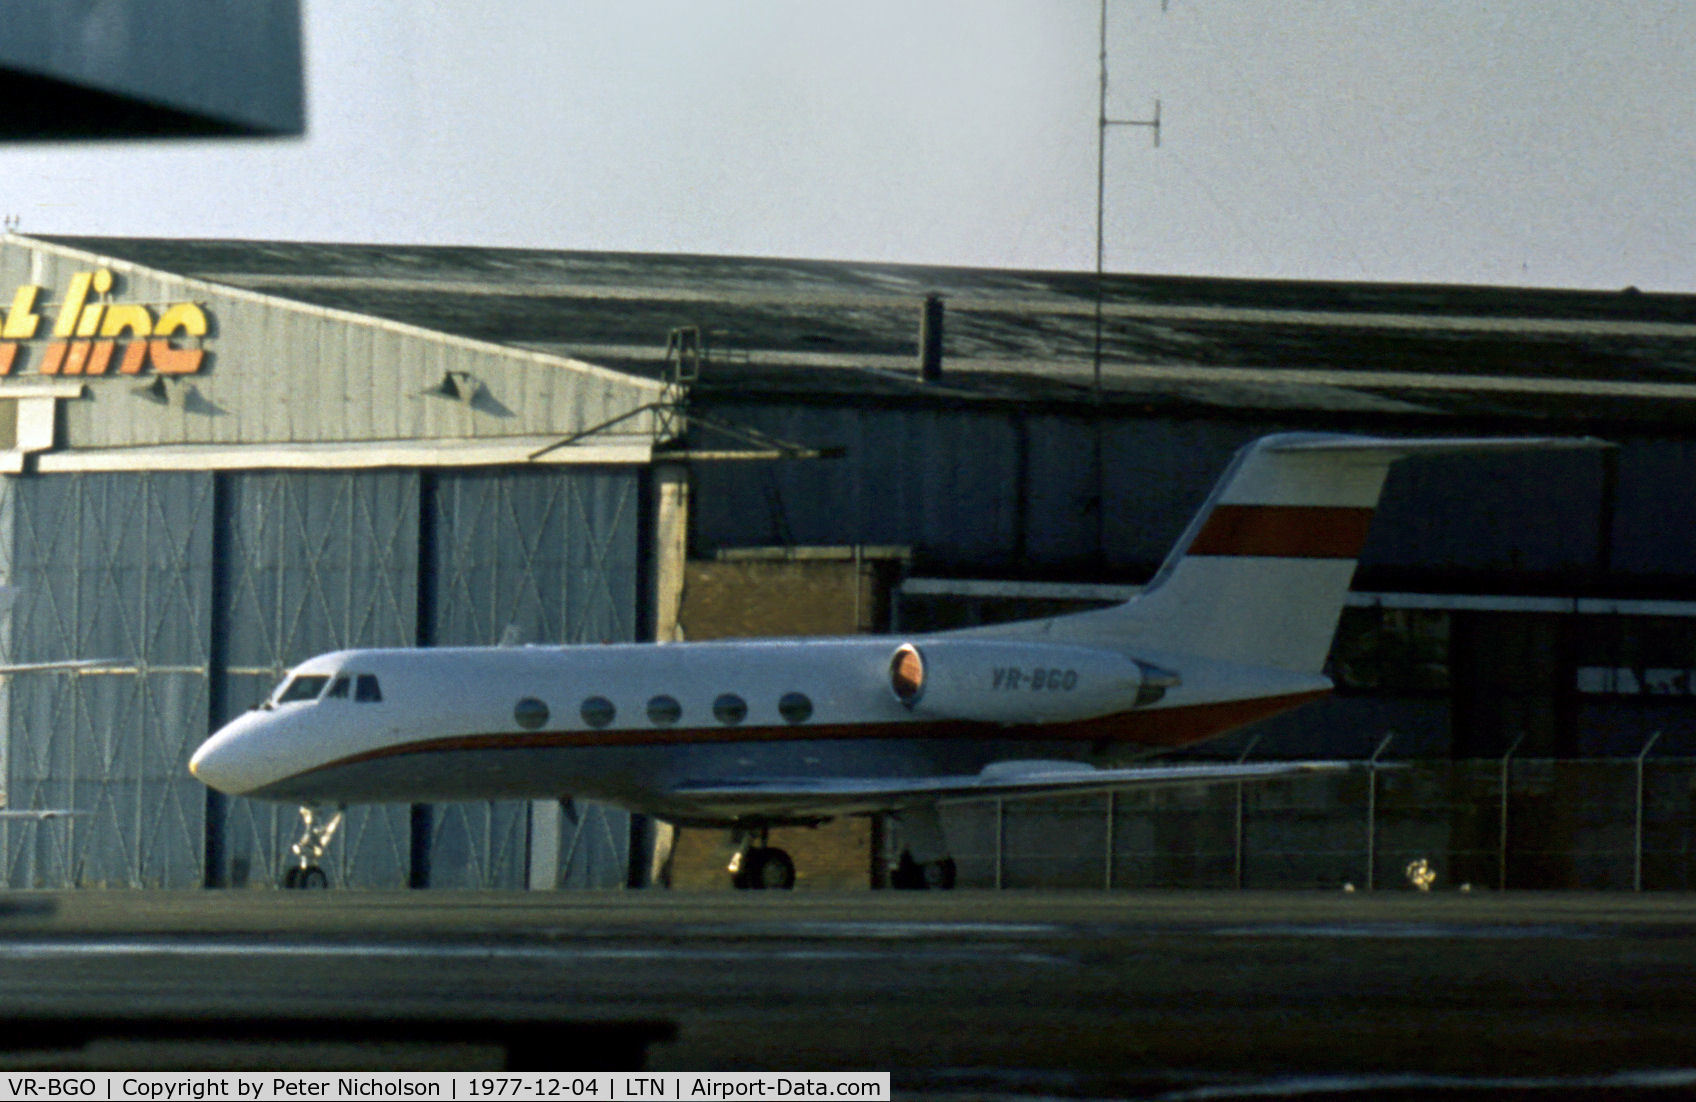 VR-BGO, 1973 Gulfstream American G-1159 Gulfstream II C/N 124, Gulfstream II operated by the Sioux Corporation as seen at Luton in December 1977.